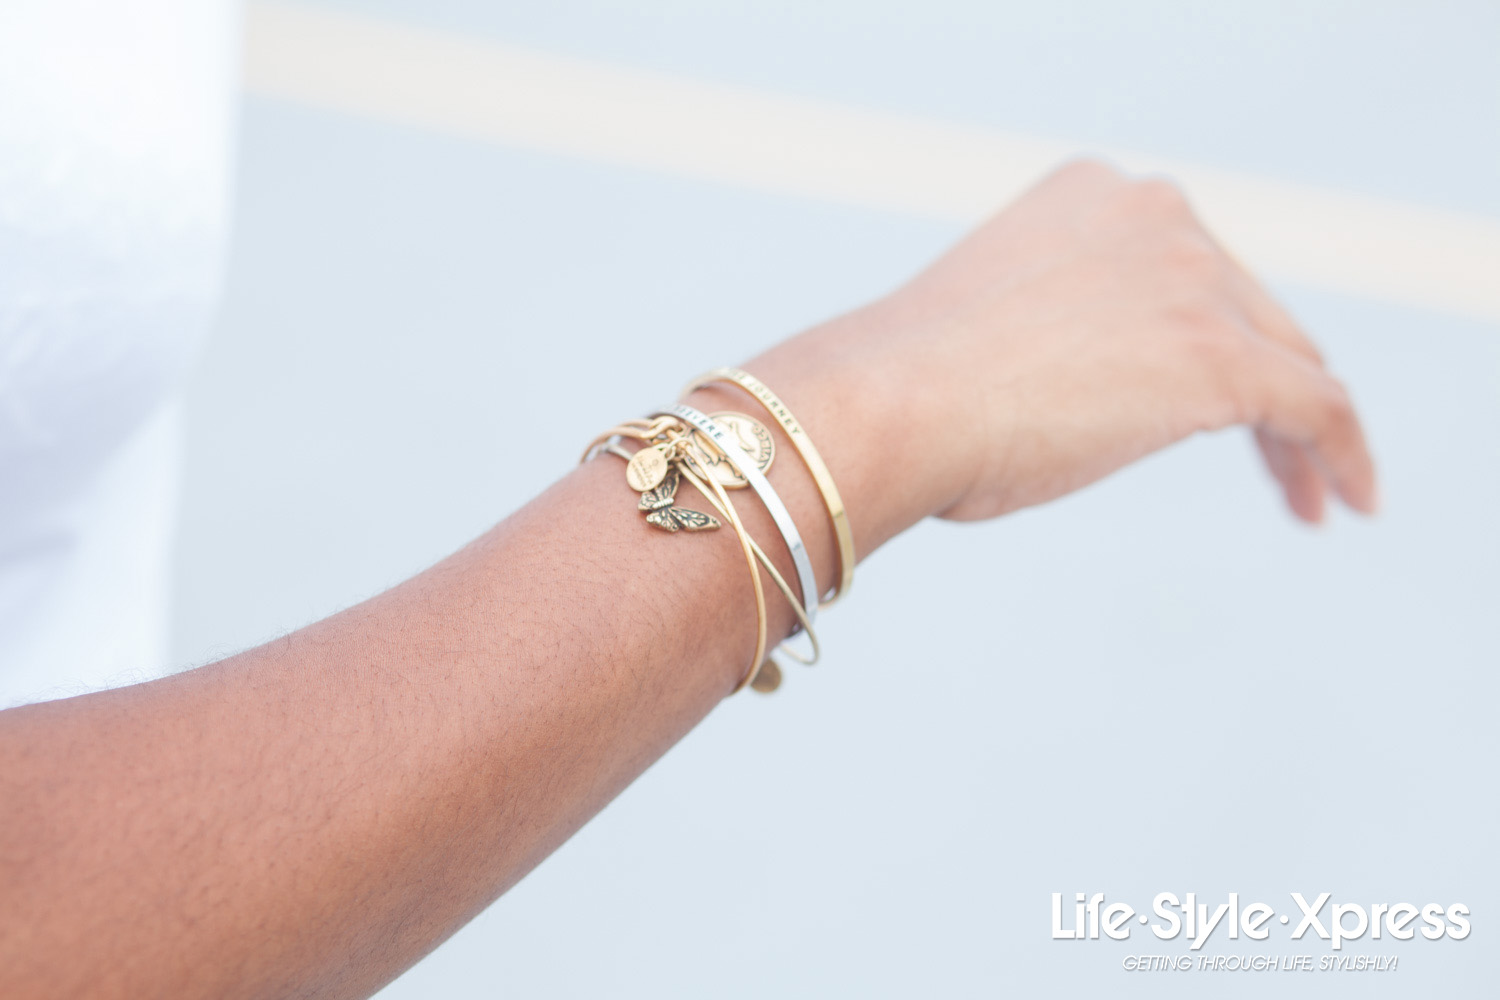 Life Style Xpress, Motivational Tips, Alex and Ani, Mantra Band 